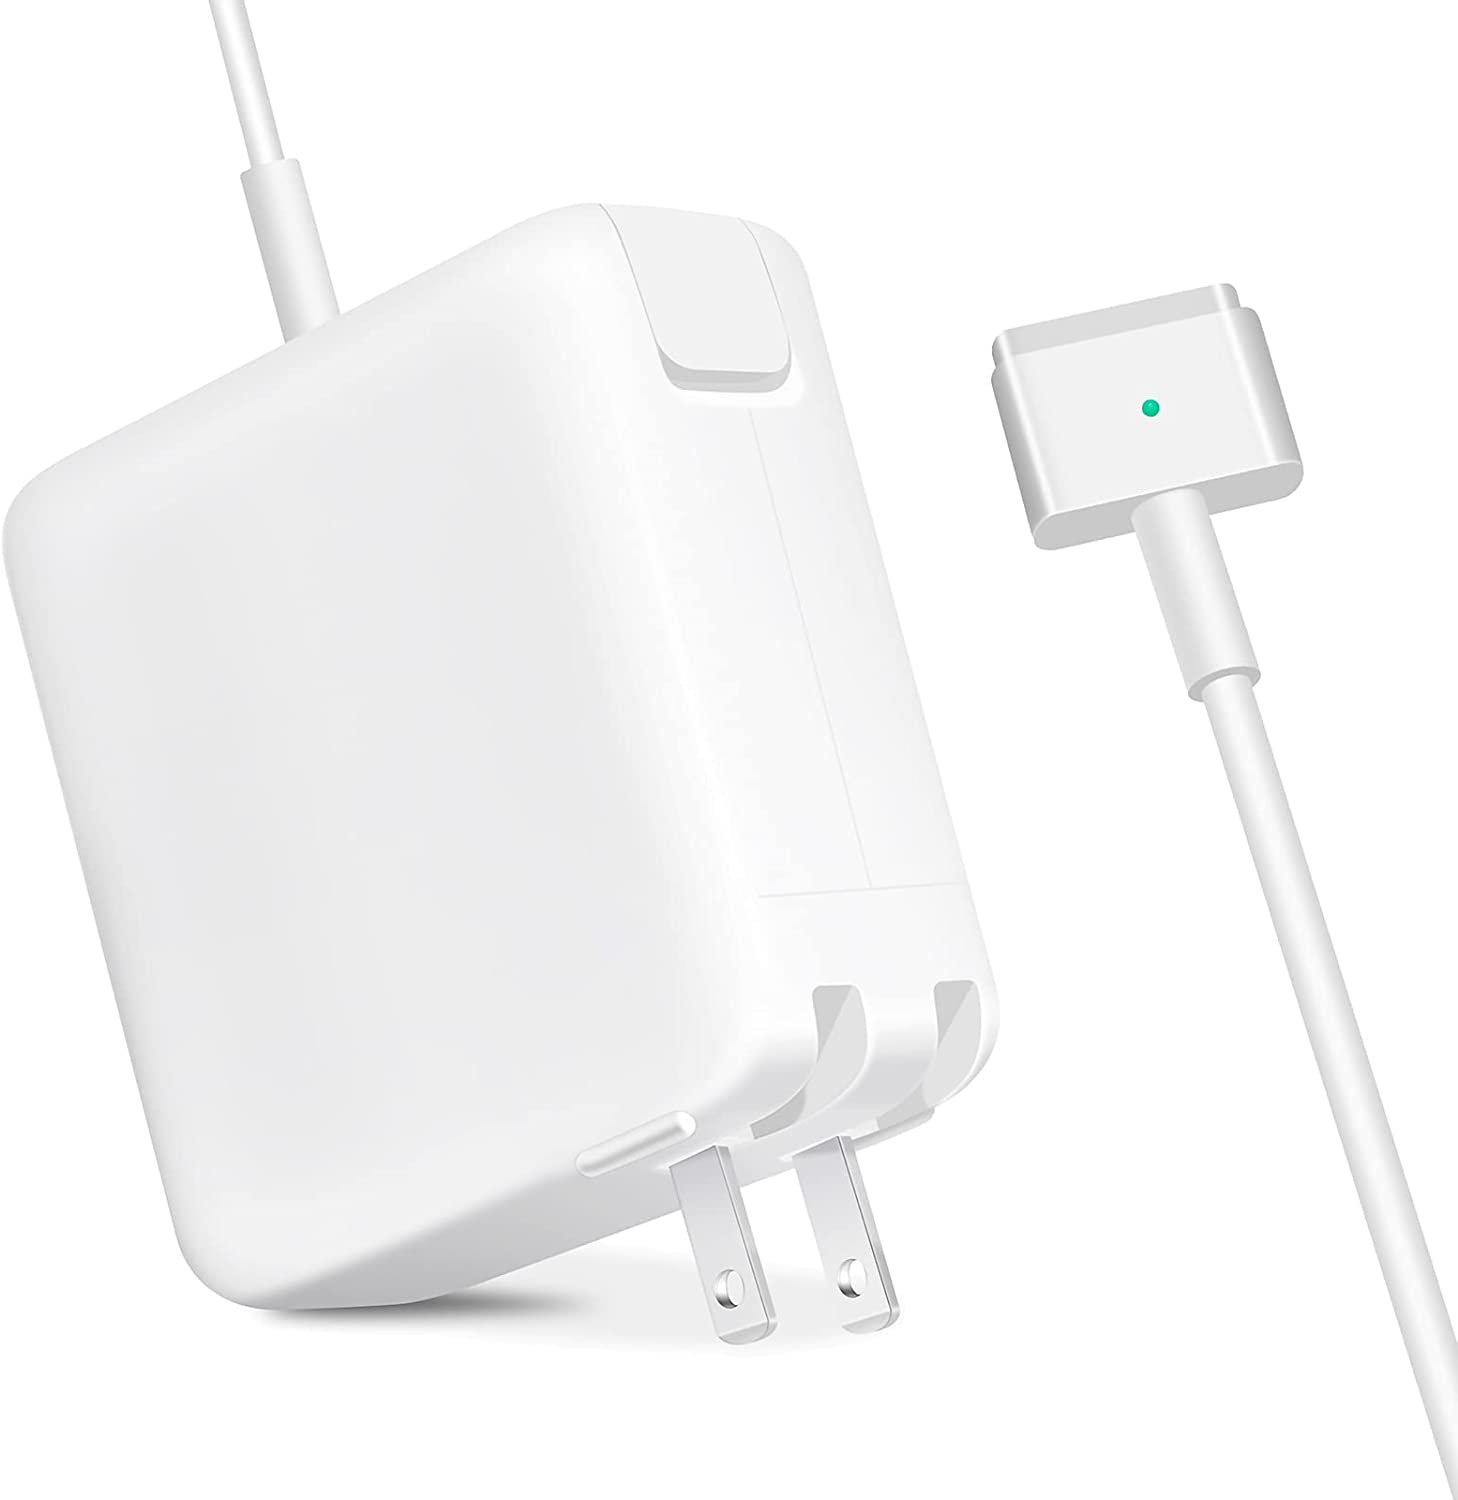 Macbook Charger - 45W Magsafe 2 Power Adapter for MacBook Air 2012 - 2017